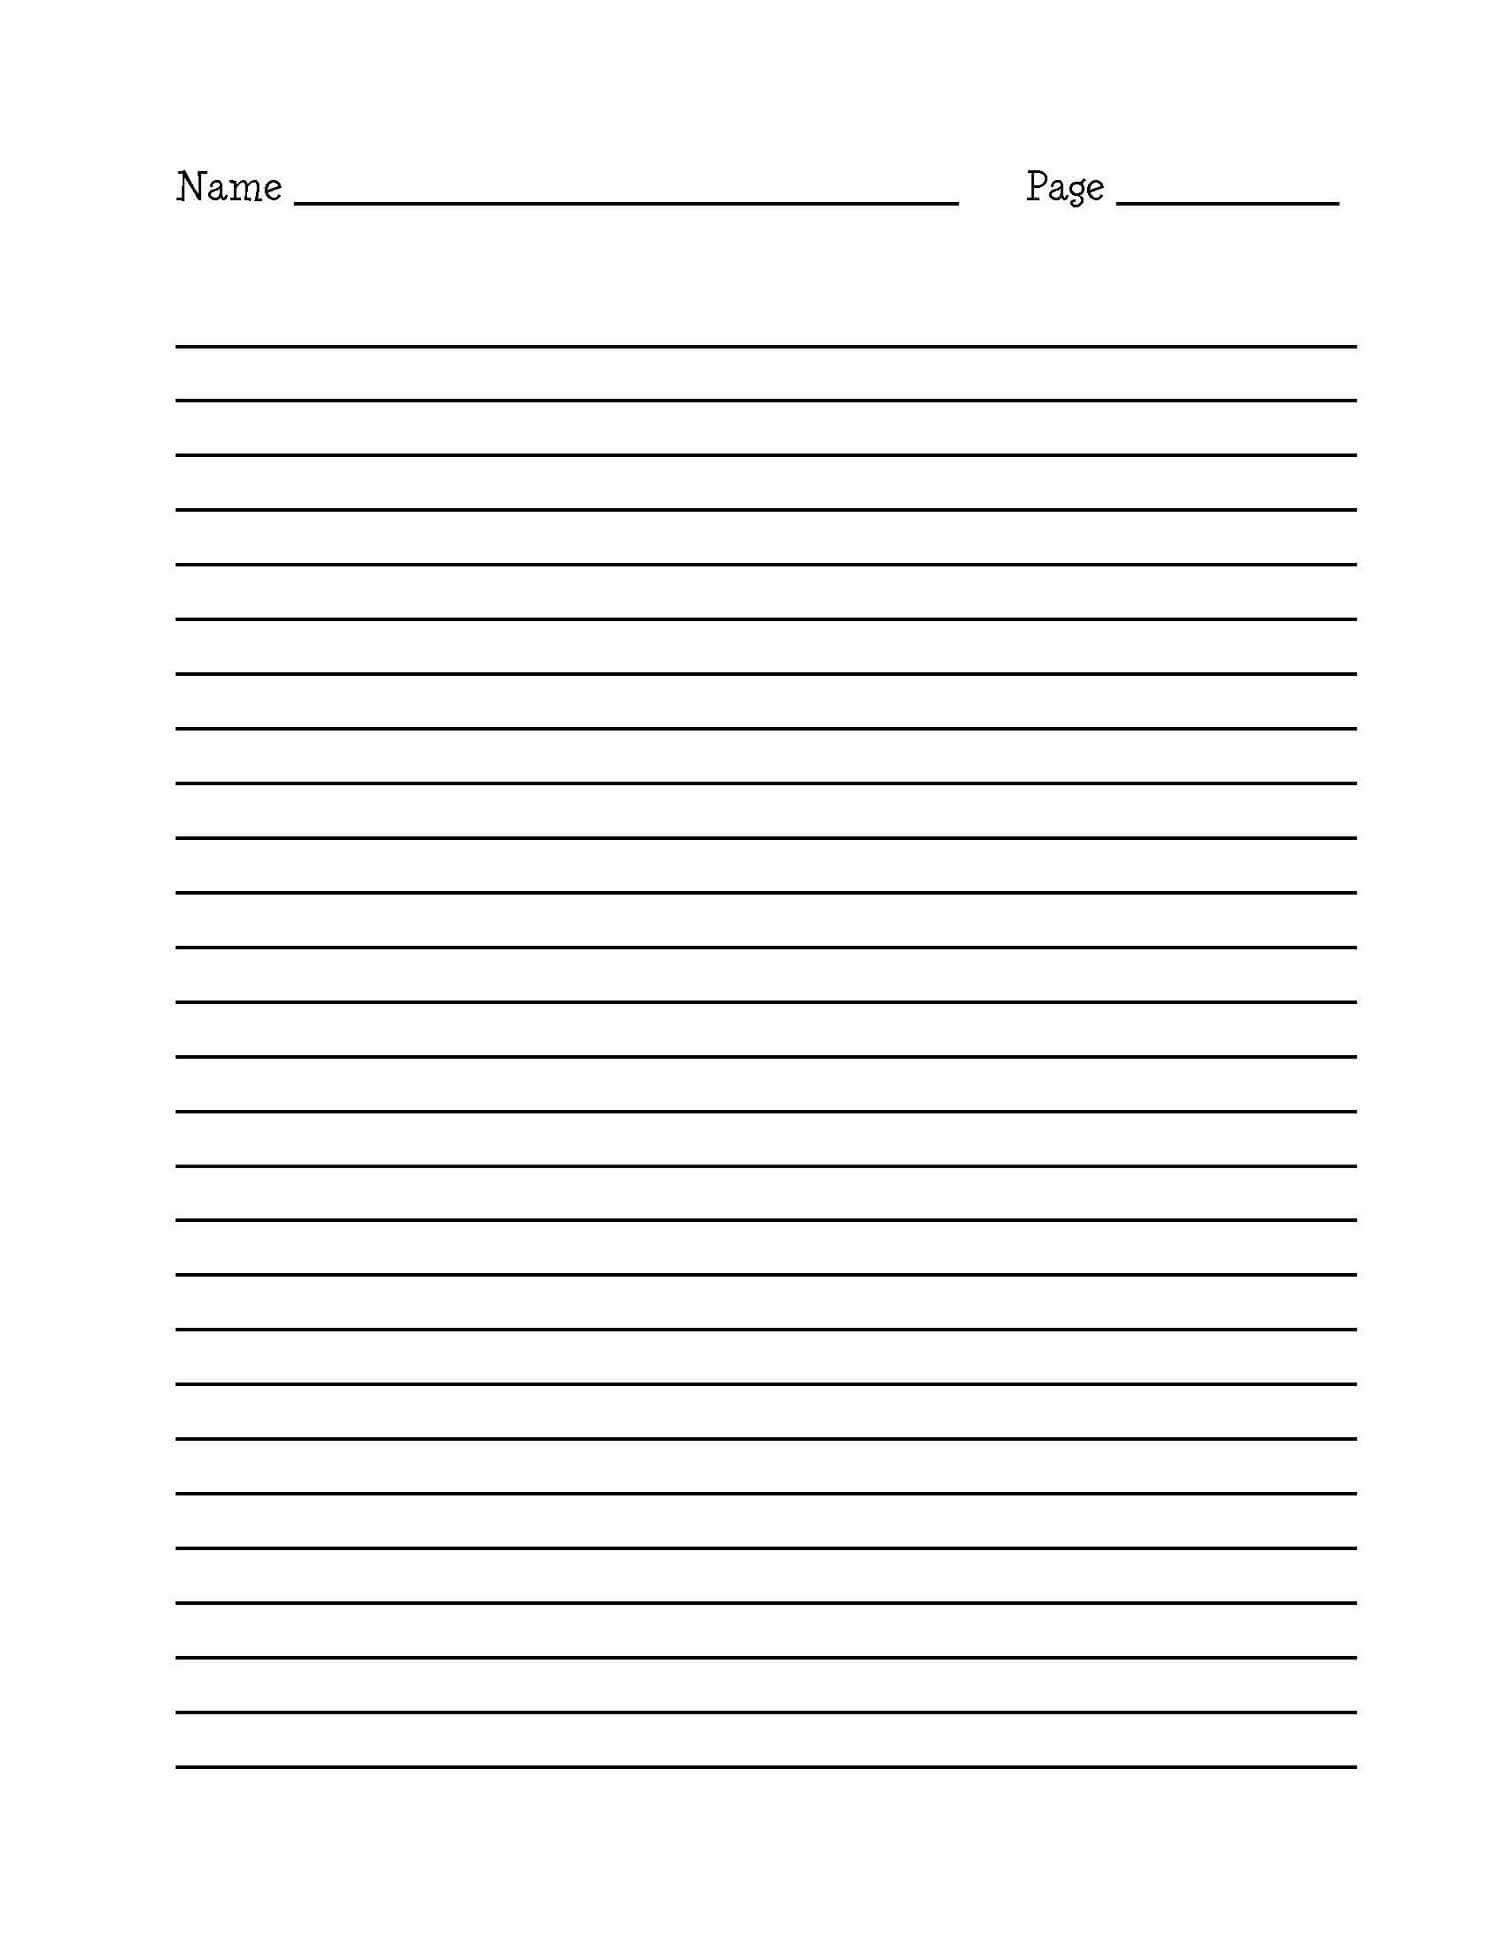 Lined Paper For Writing For Cute Writing Paper | Dear Joya Inside College Ruled Lined Paper Template Word 2007